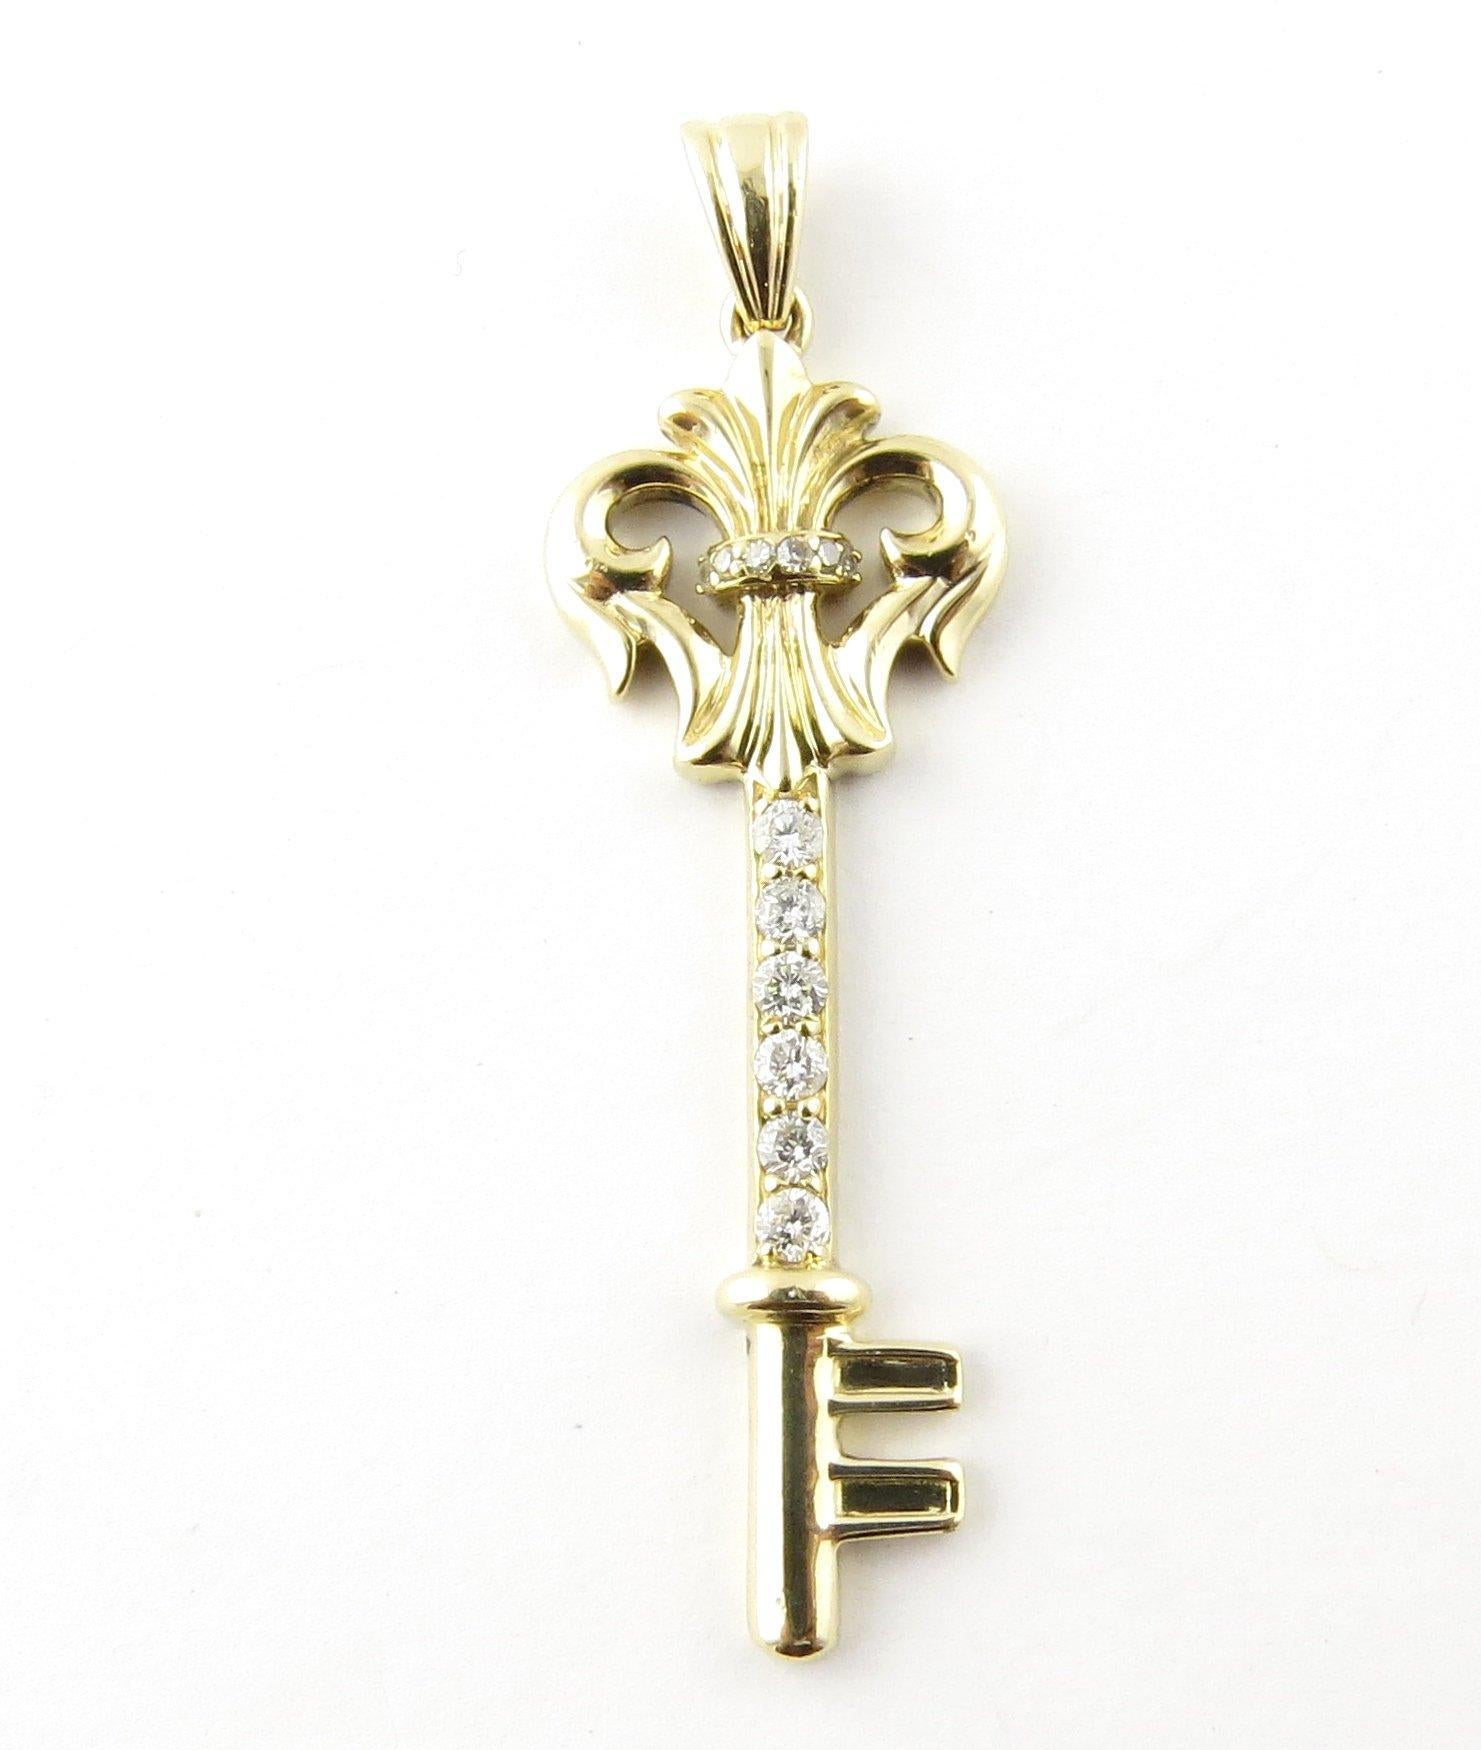 Vintage 14 Karat Yellow Gold and Diamond Key Pendant- 
This sparkling pendant features a skeleton key decorated with six round brilliant cut diamonds and six single cut diamonds set in meticulously detailed 14K yellow gold. 
Approximate total